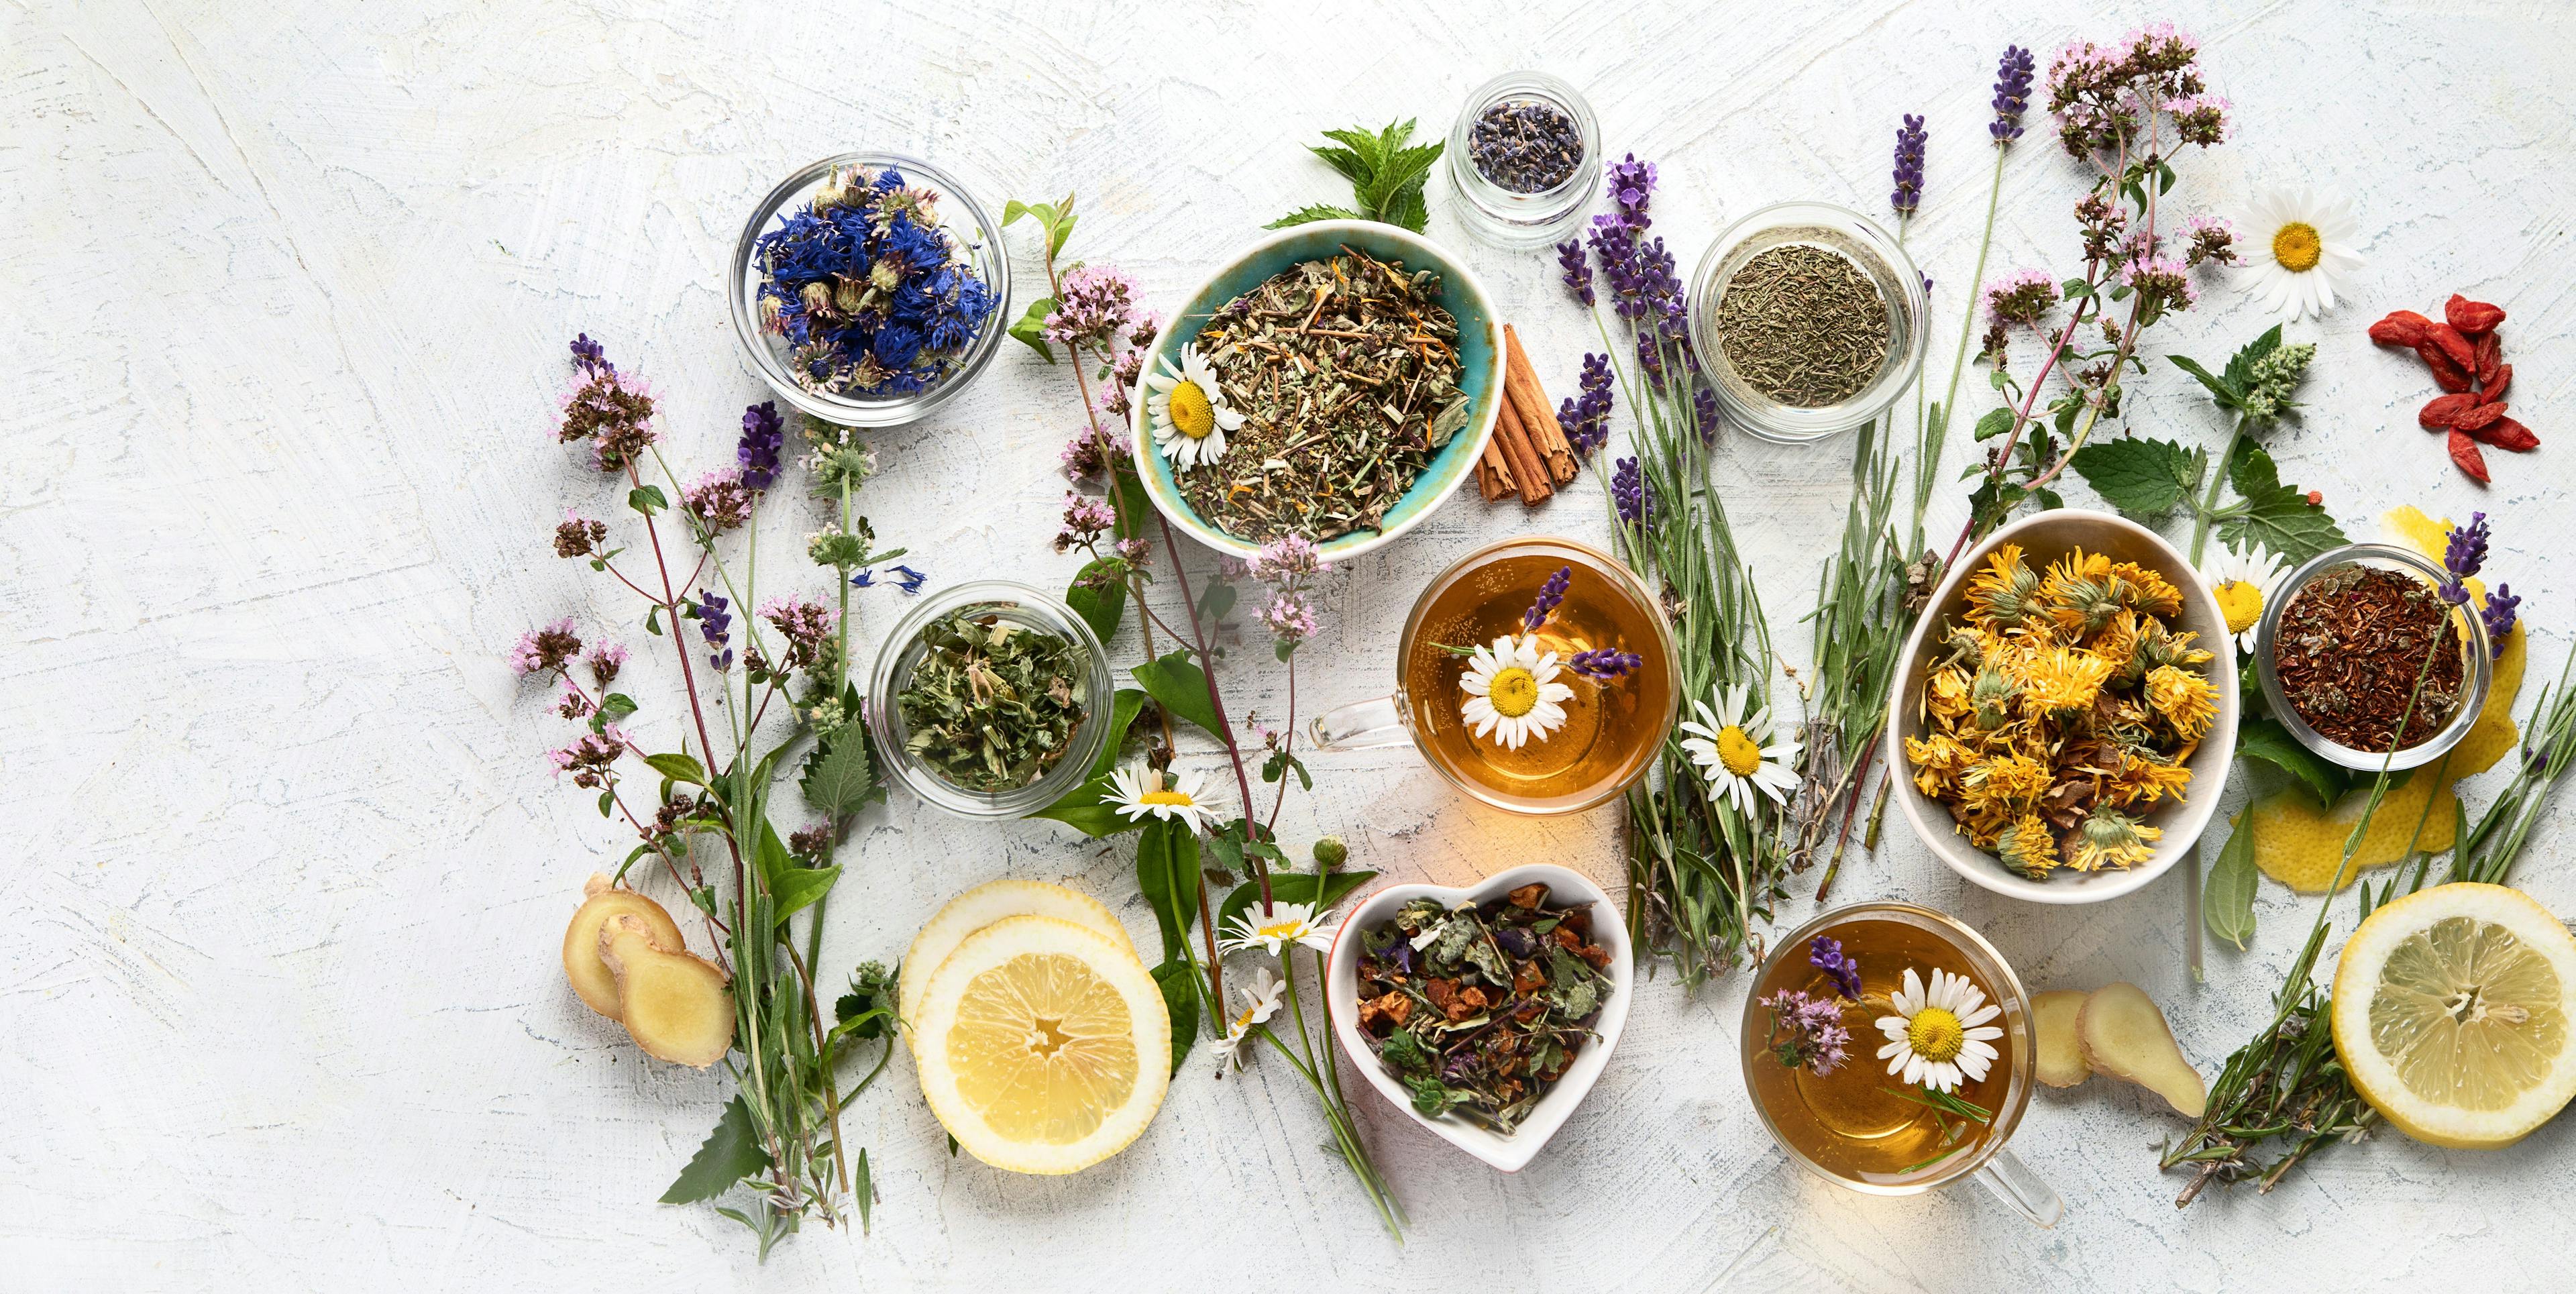 Herbal Medicine: What Psychiatrists Need to Know